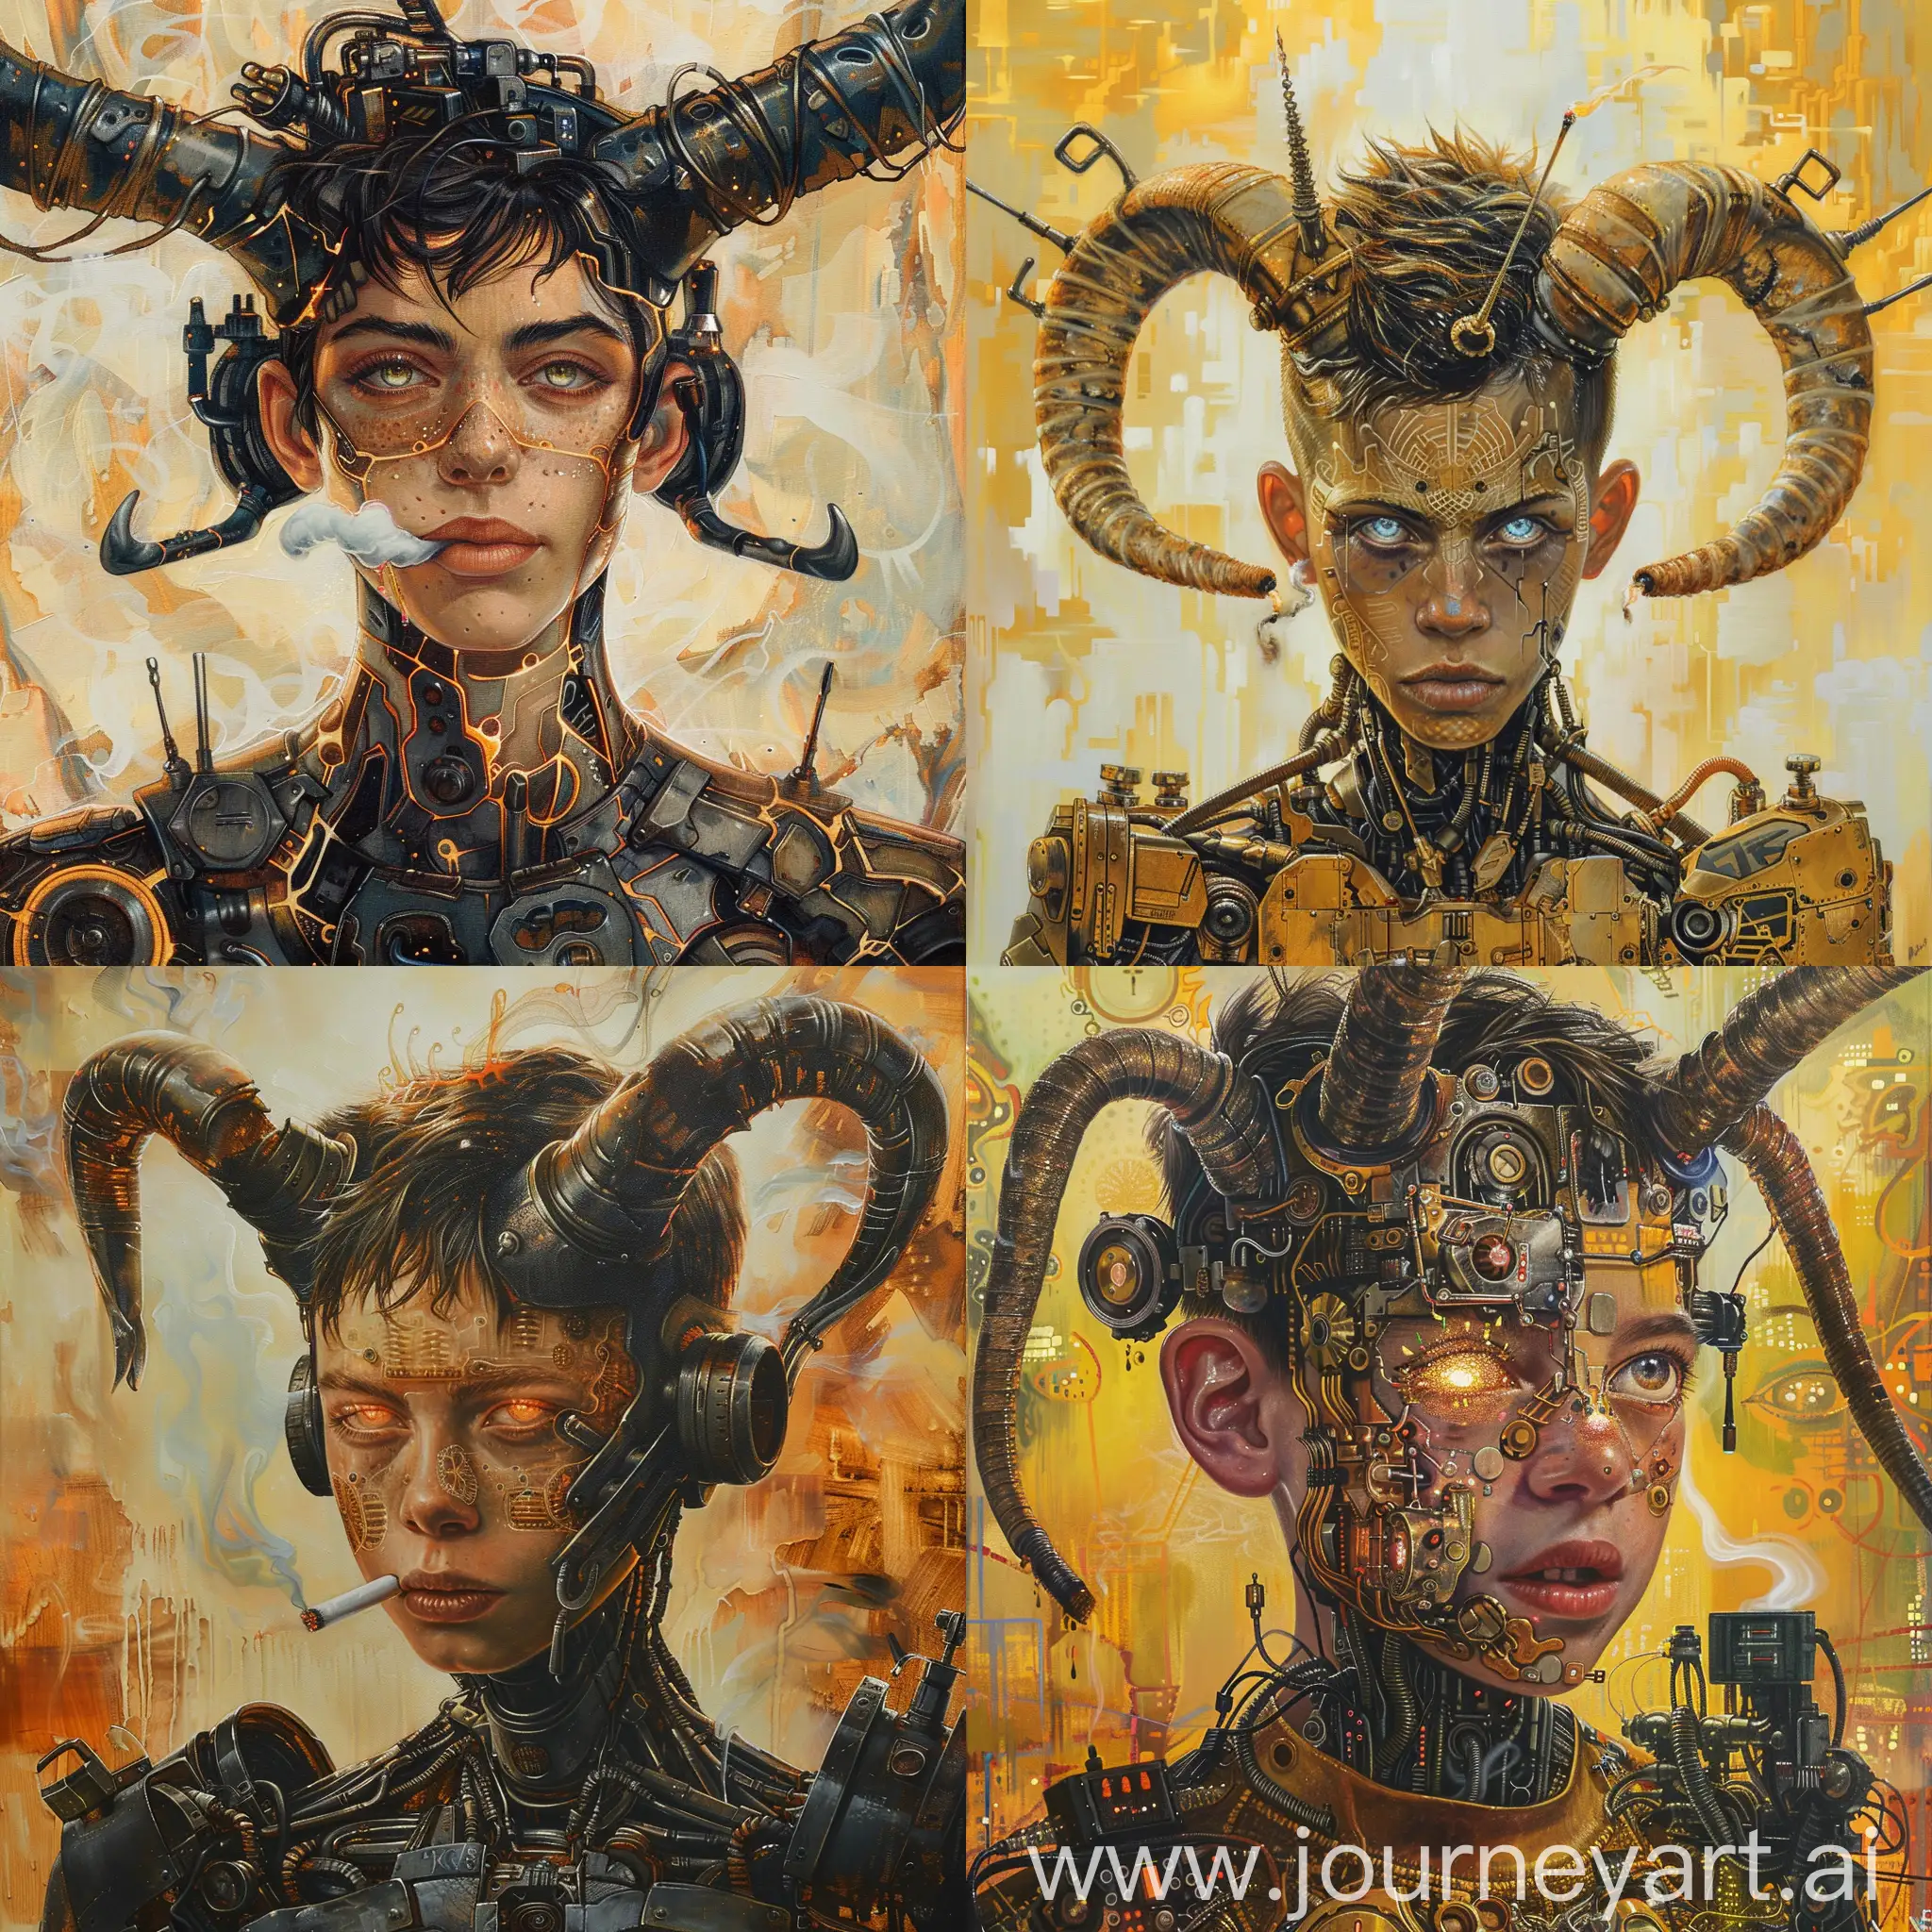 as an oil painting, style of gustav klimt, full body, young male android fighter, two horns, intense detailed energetic smoking eyes, detailed young face, mechanic body parts, epic, beautiful cinematic bright background

